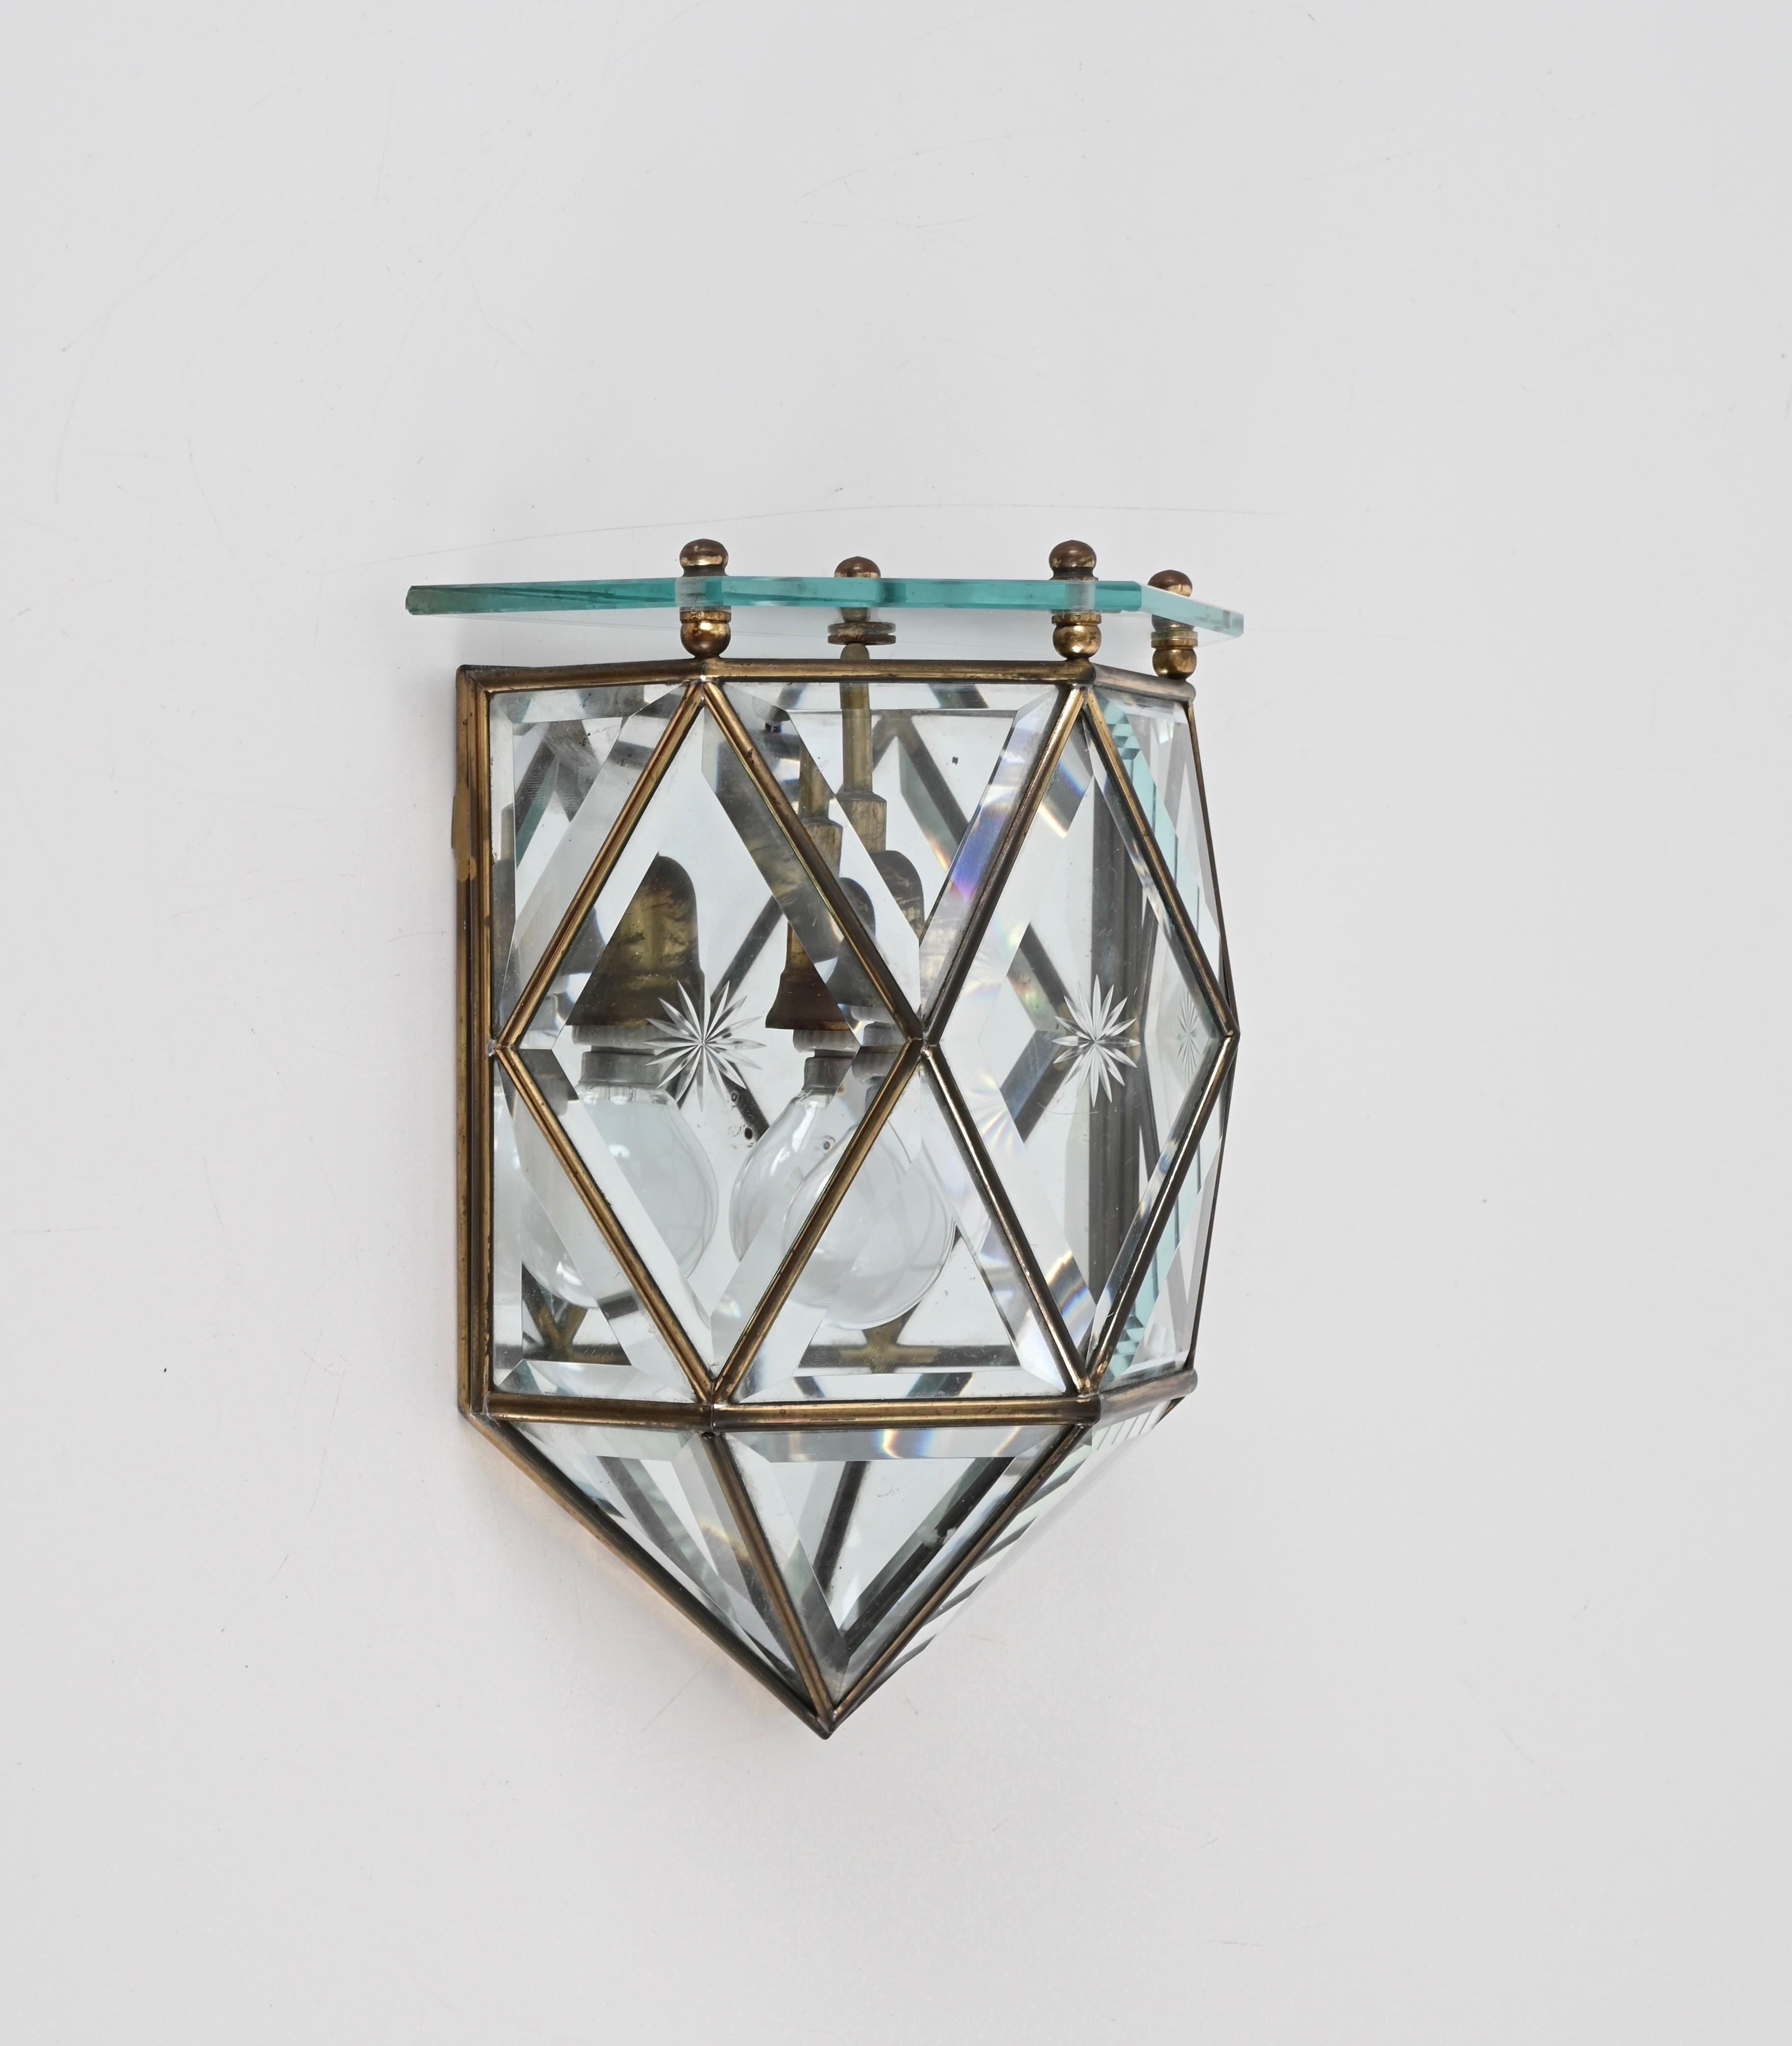 20th Century Fontana Arte Pair of Sconces in Beveled Glass, Brass and Mirror, Italy, 1940s For Sale